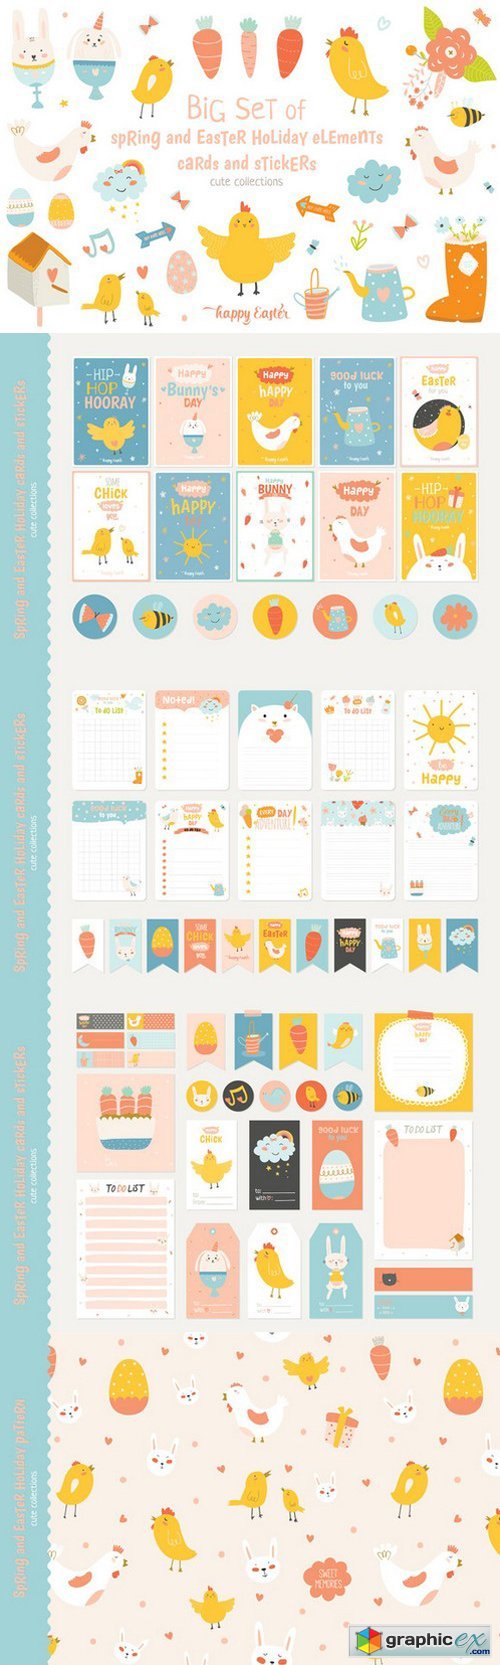 Cute Spring and Easter holiday set